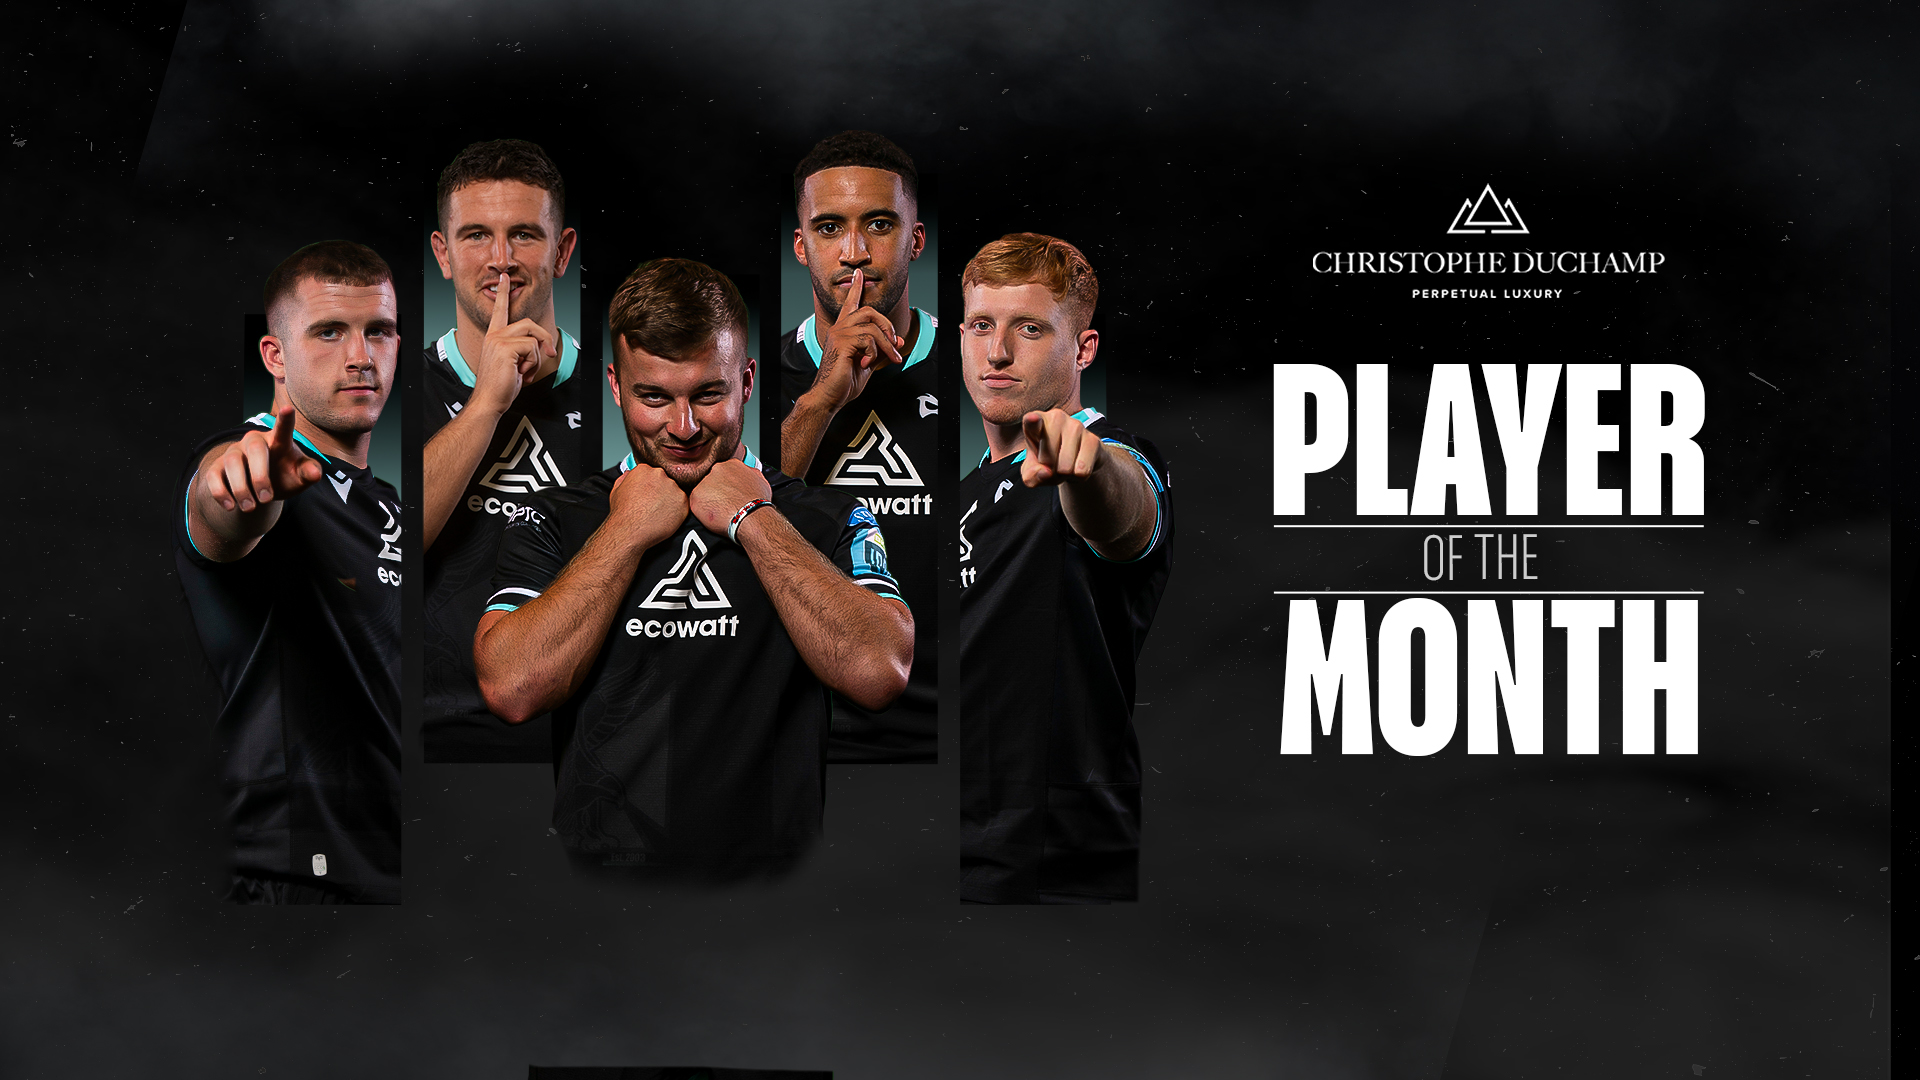 Ospreys Player of the Month